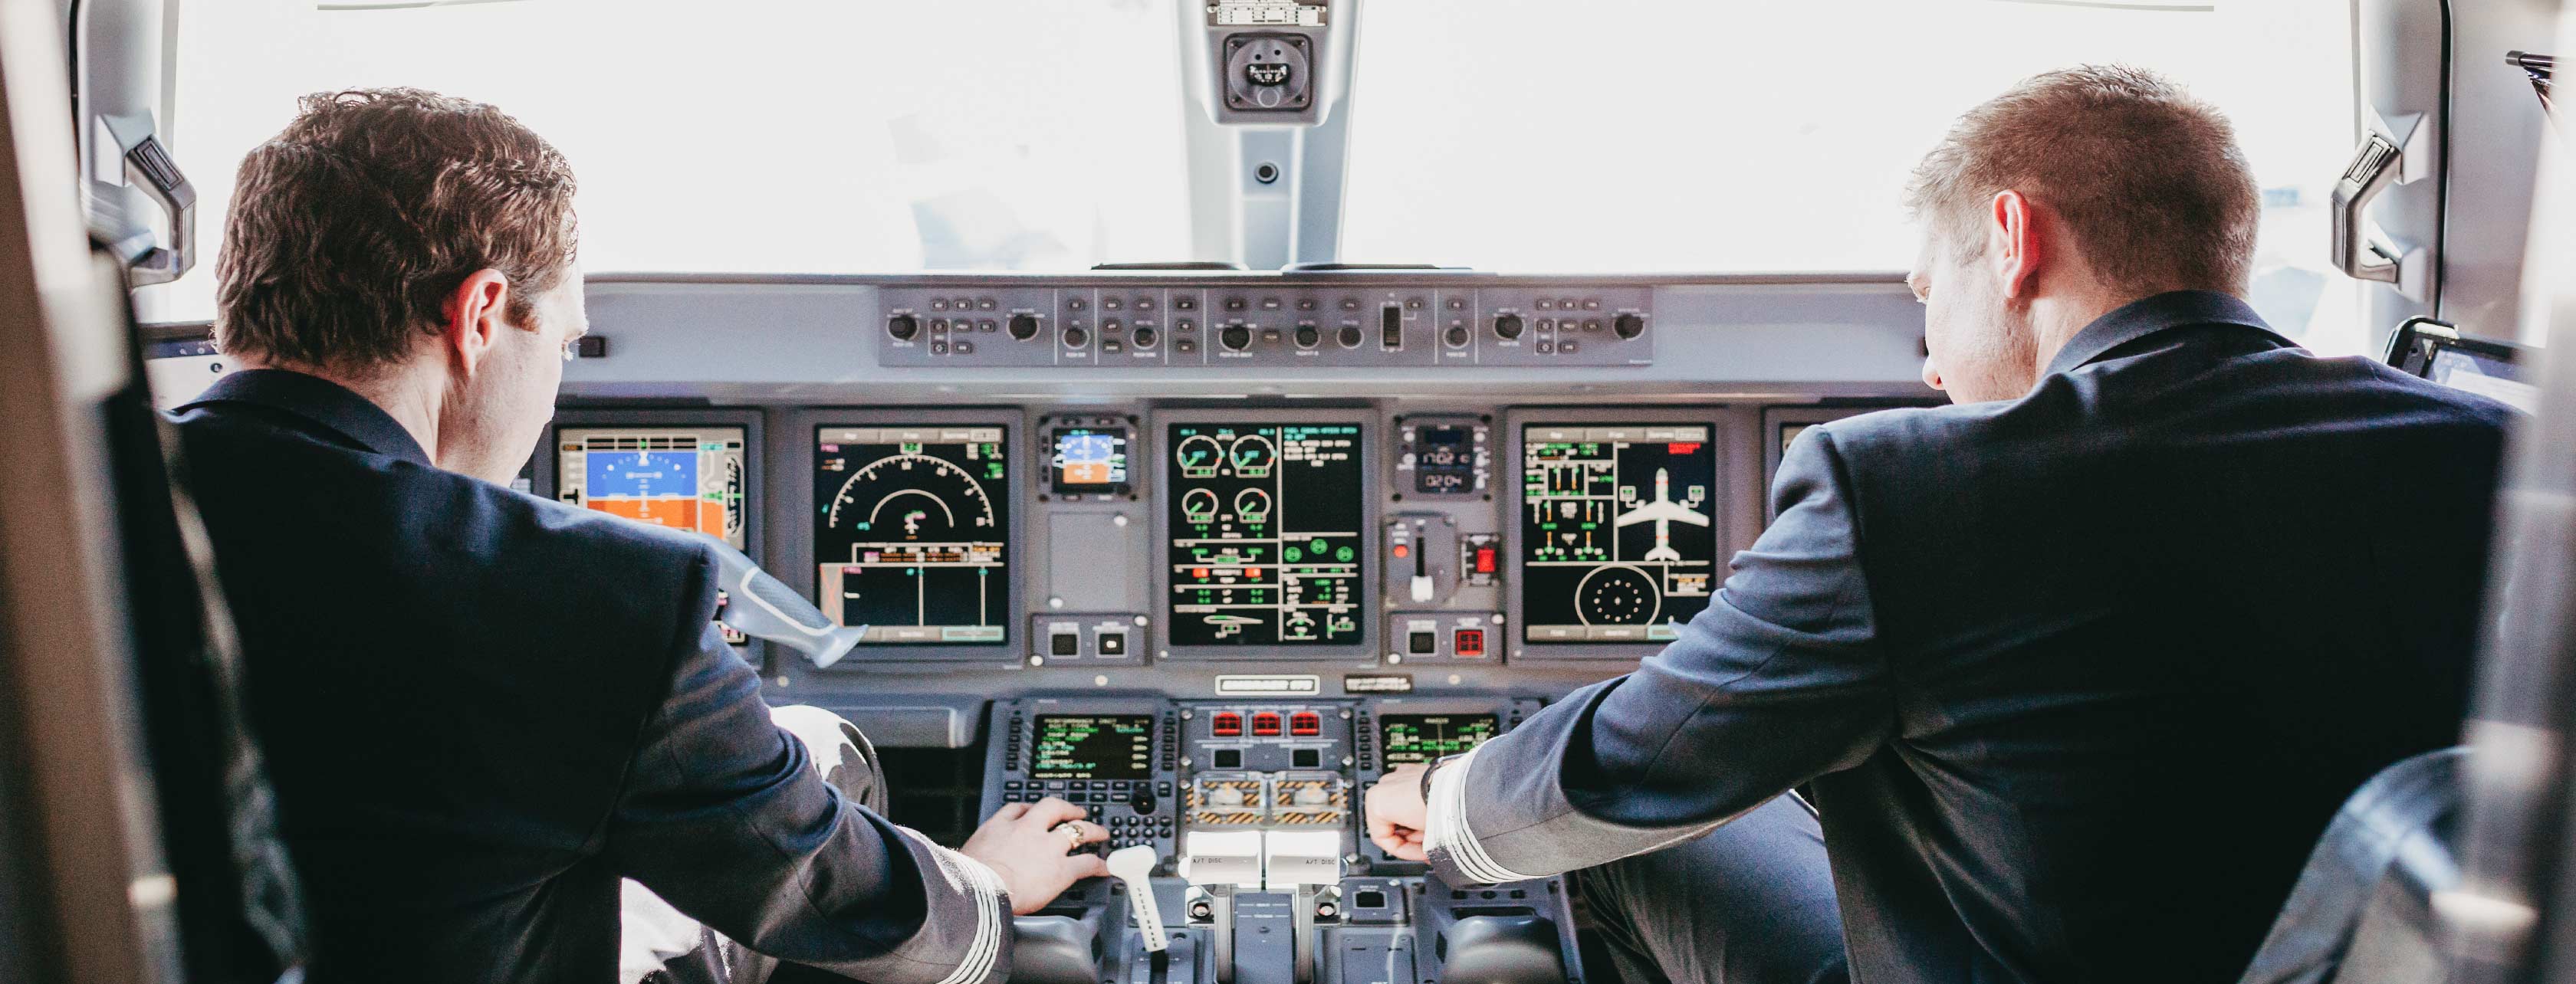 Airline Pilots in Cockpit of ERJ Aircraft